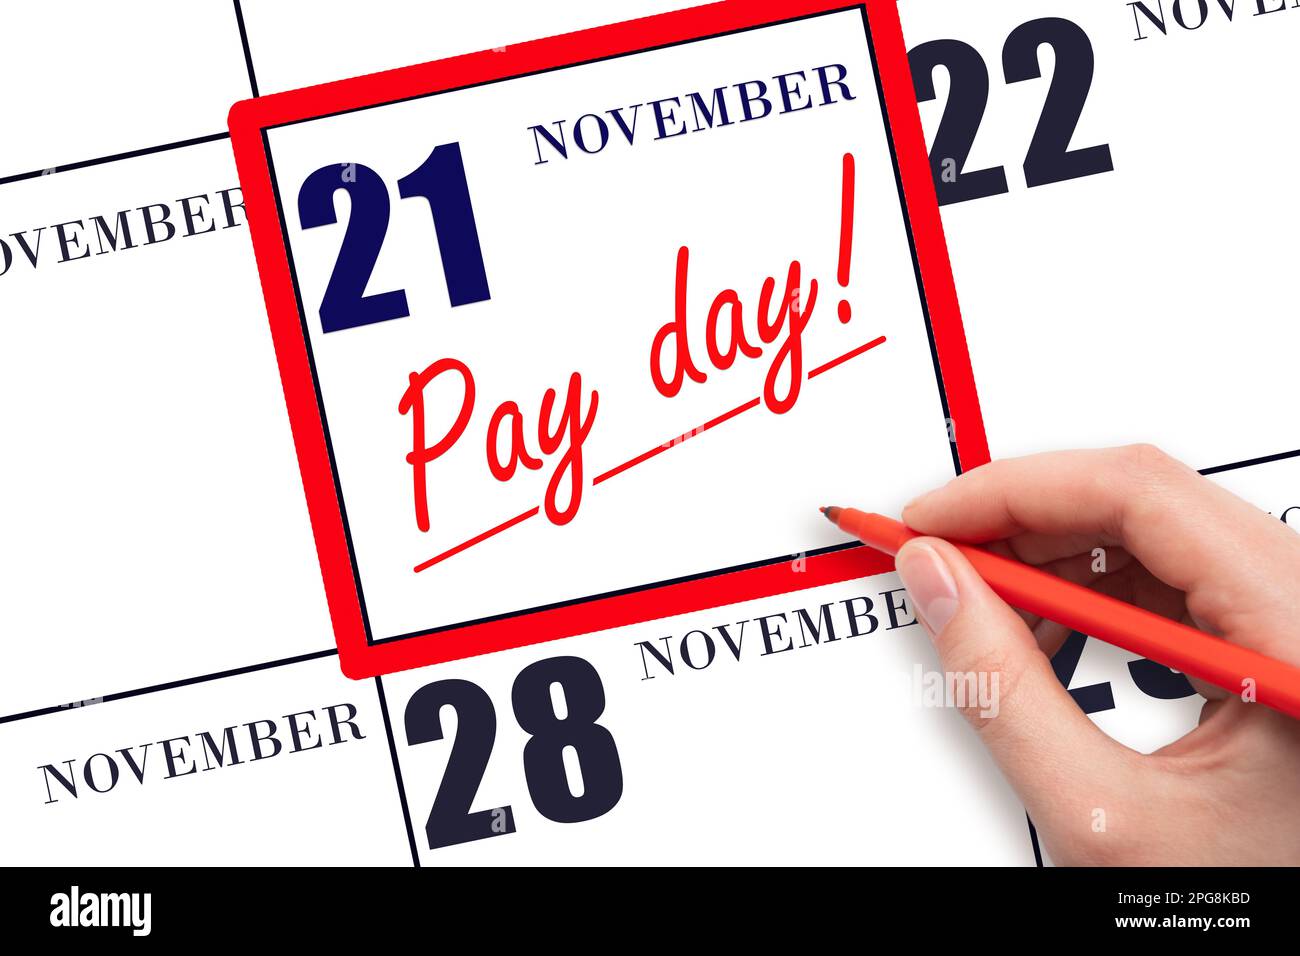 21st day of November. Hand writing text PAY DATE on calendar date November 21 and underline it. Payment due date. Reminder concept of payment. Autumn Stock Photo